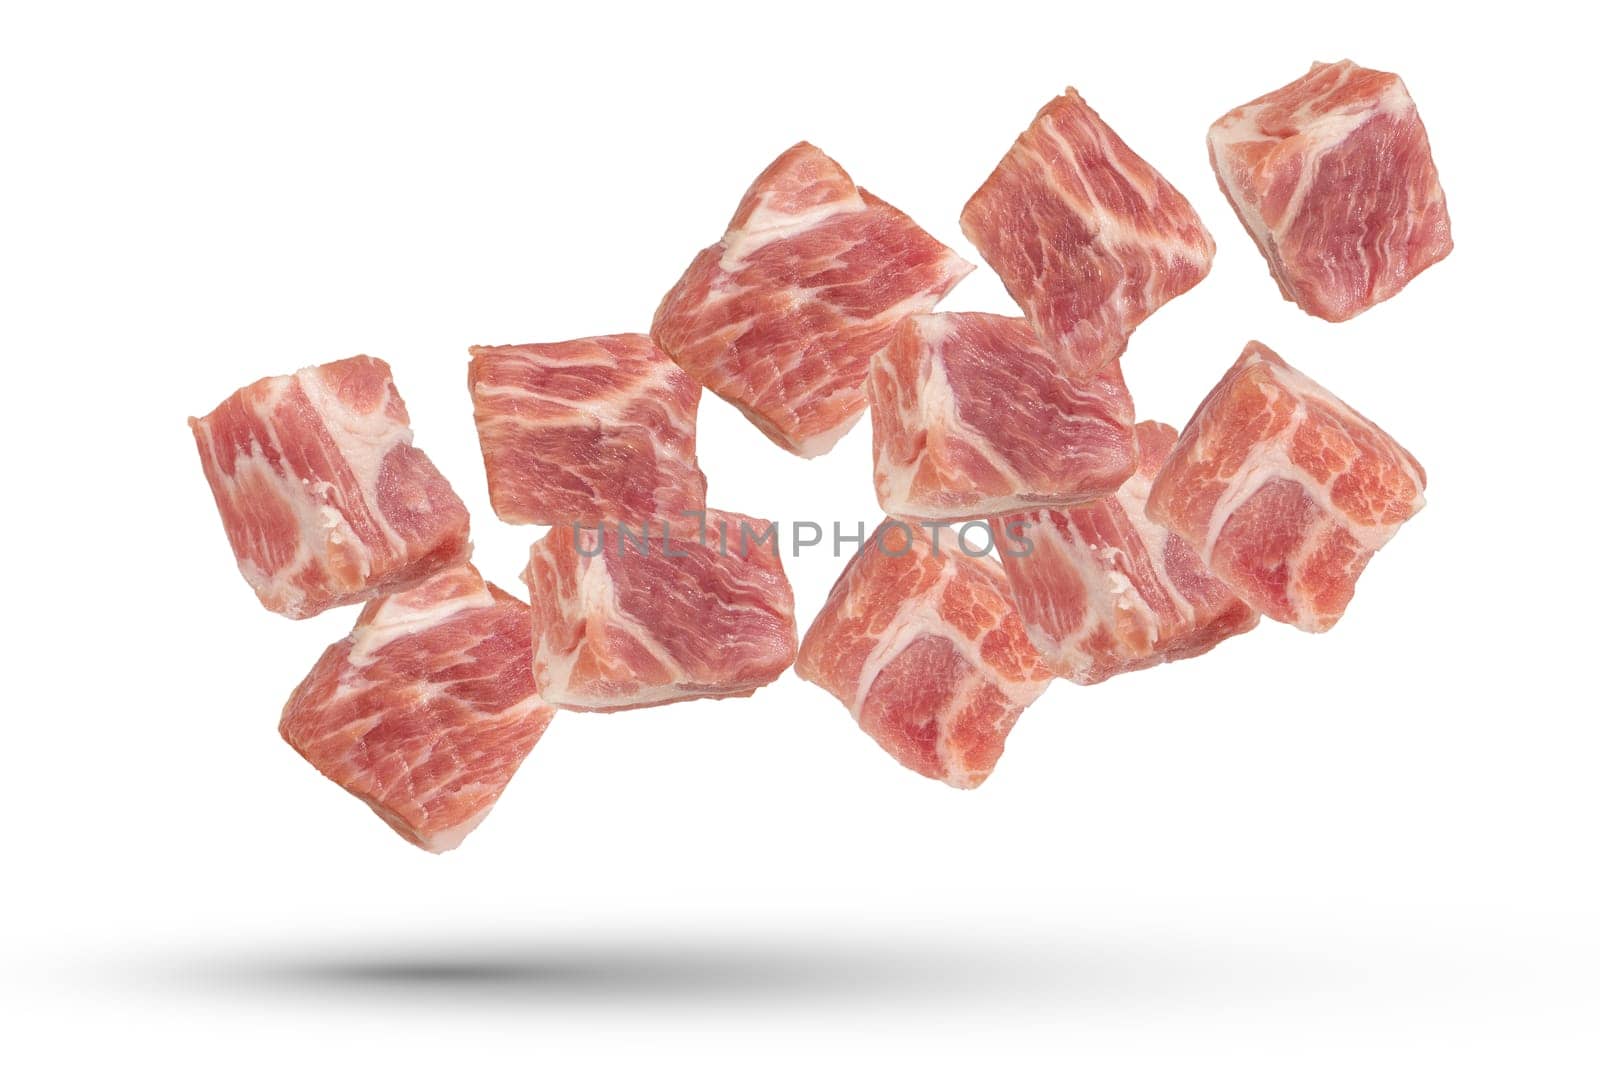 Raw pork cubes. Cubes of pieces of pork scatter in different directions, isolated on a white background. Isolate cubes of juicy pork for inserting into a design or project. High quality photo